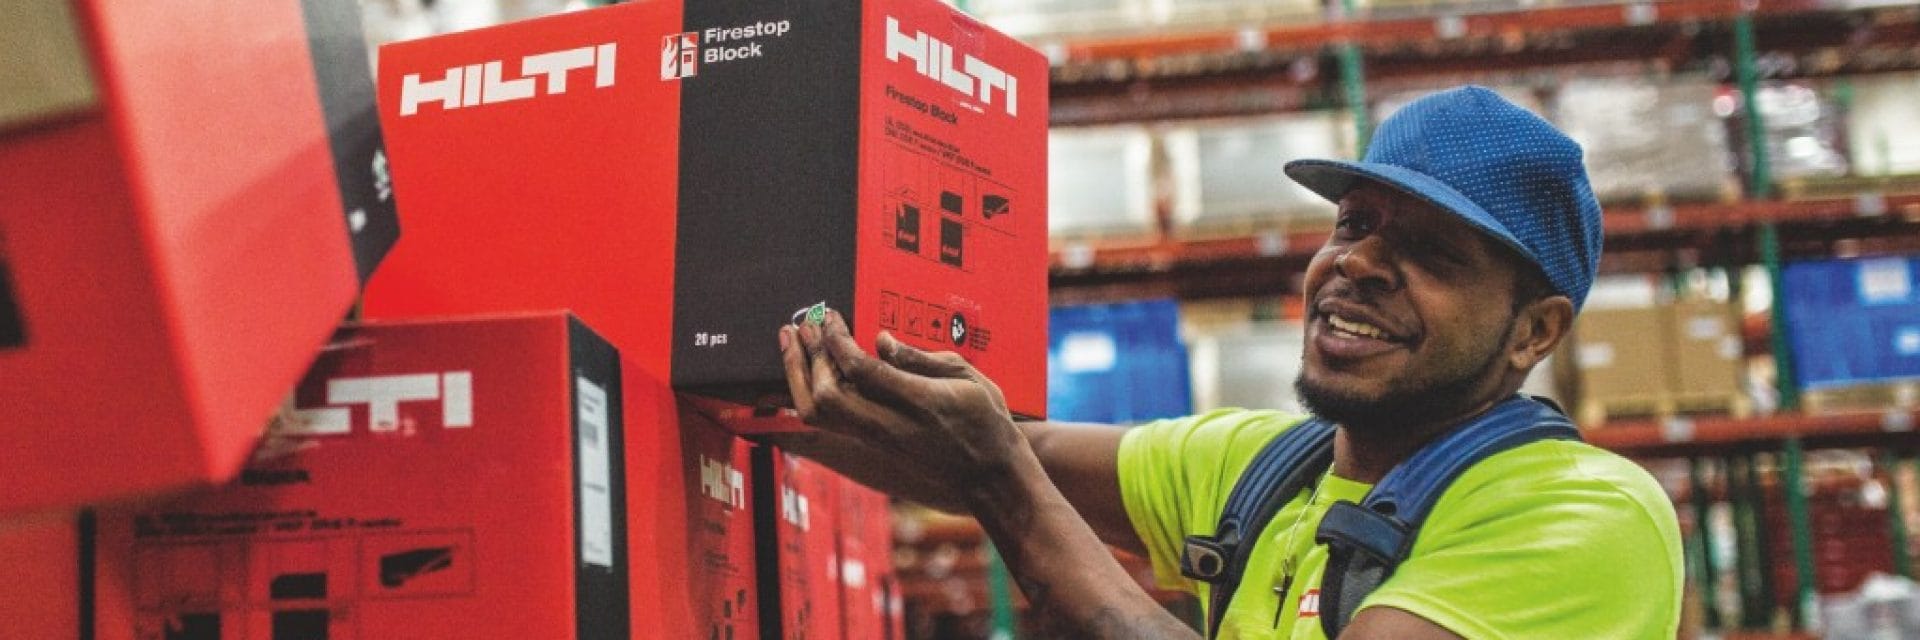 How to qualify as a Hilti Supplier